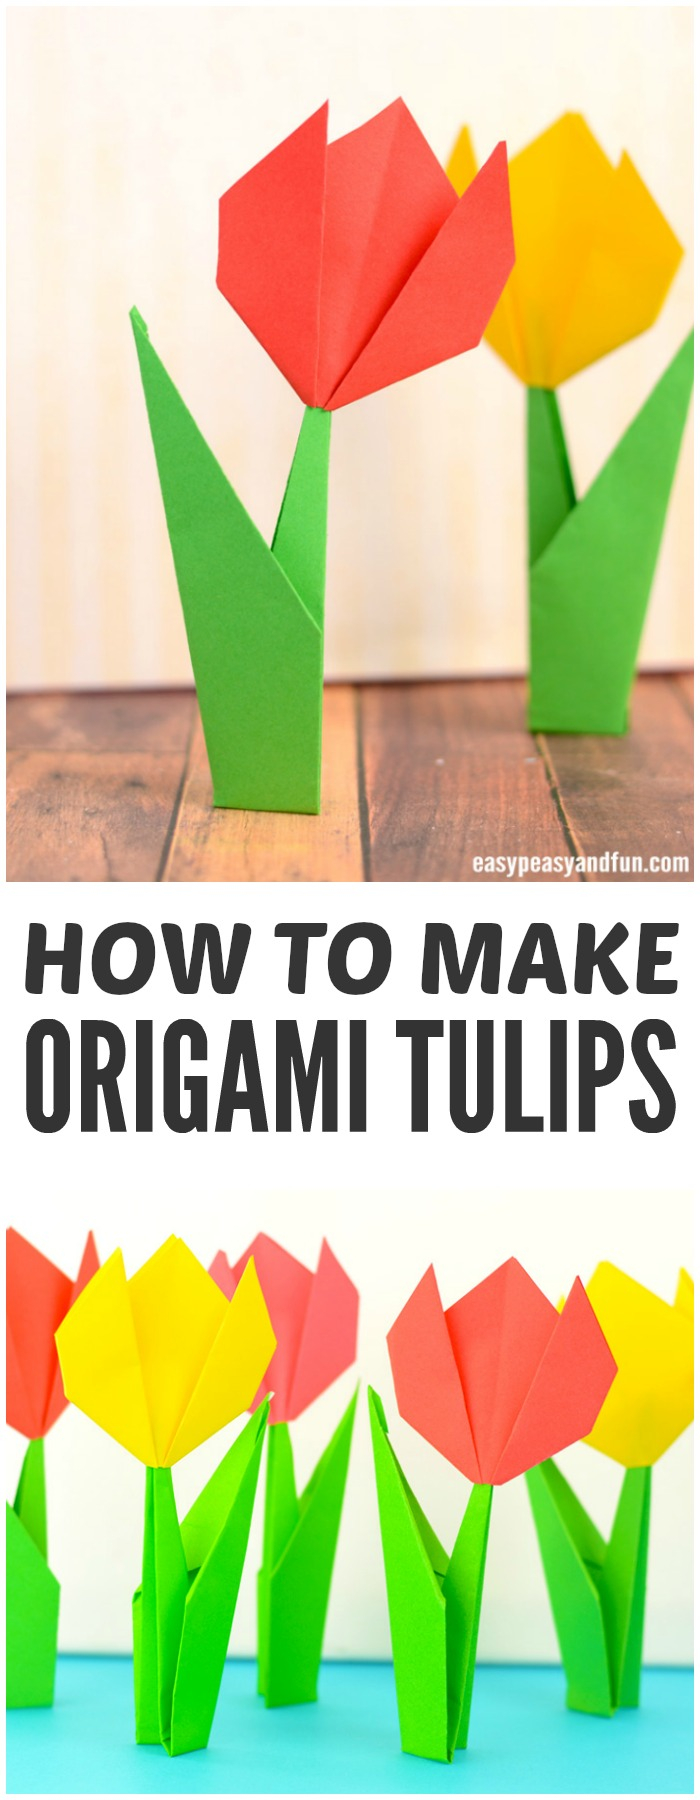 Origami Things For Kids How To Make Origami Flowers Origami Tulip Tutorial With Diagram